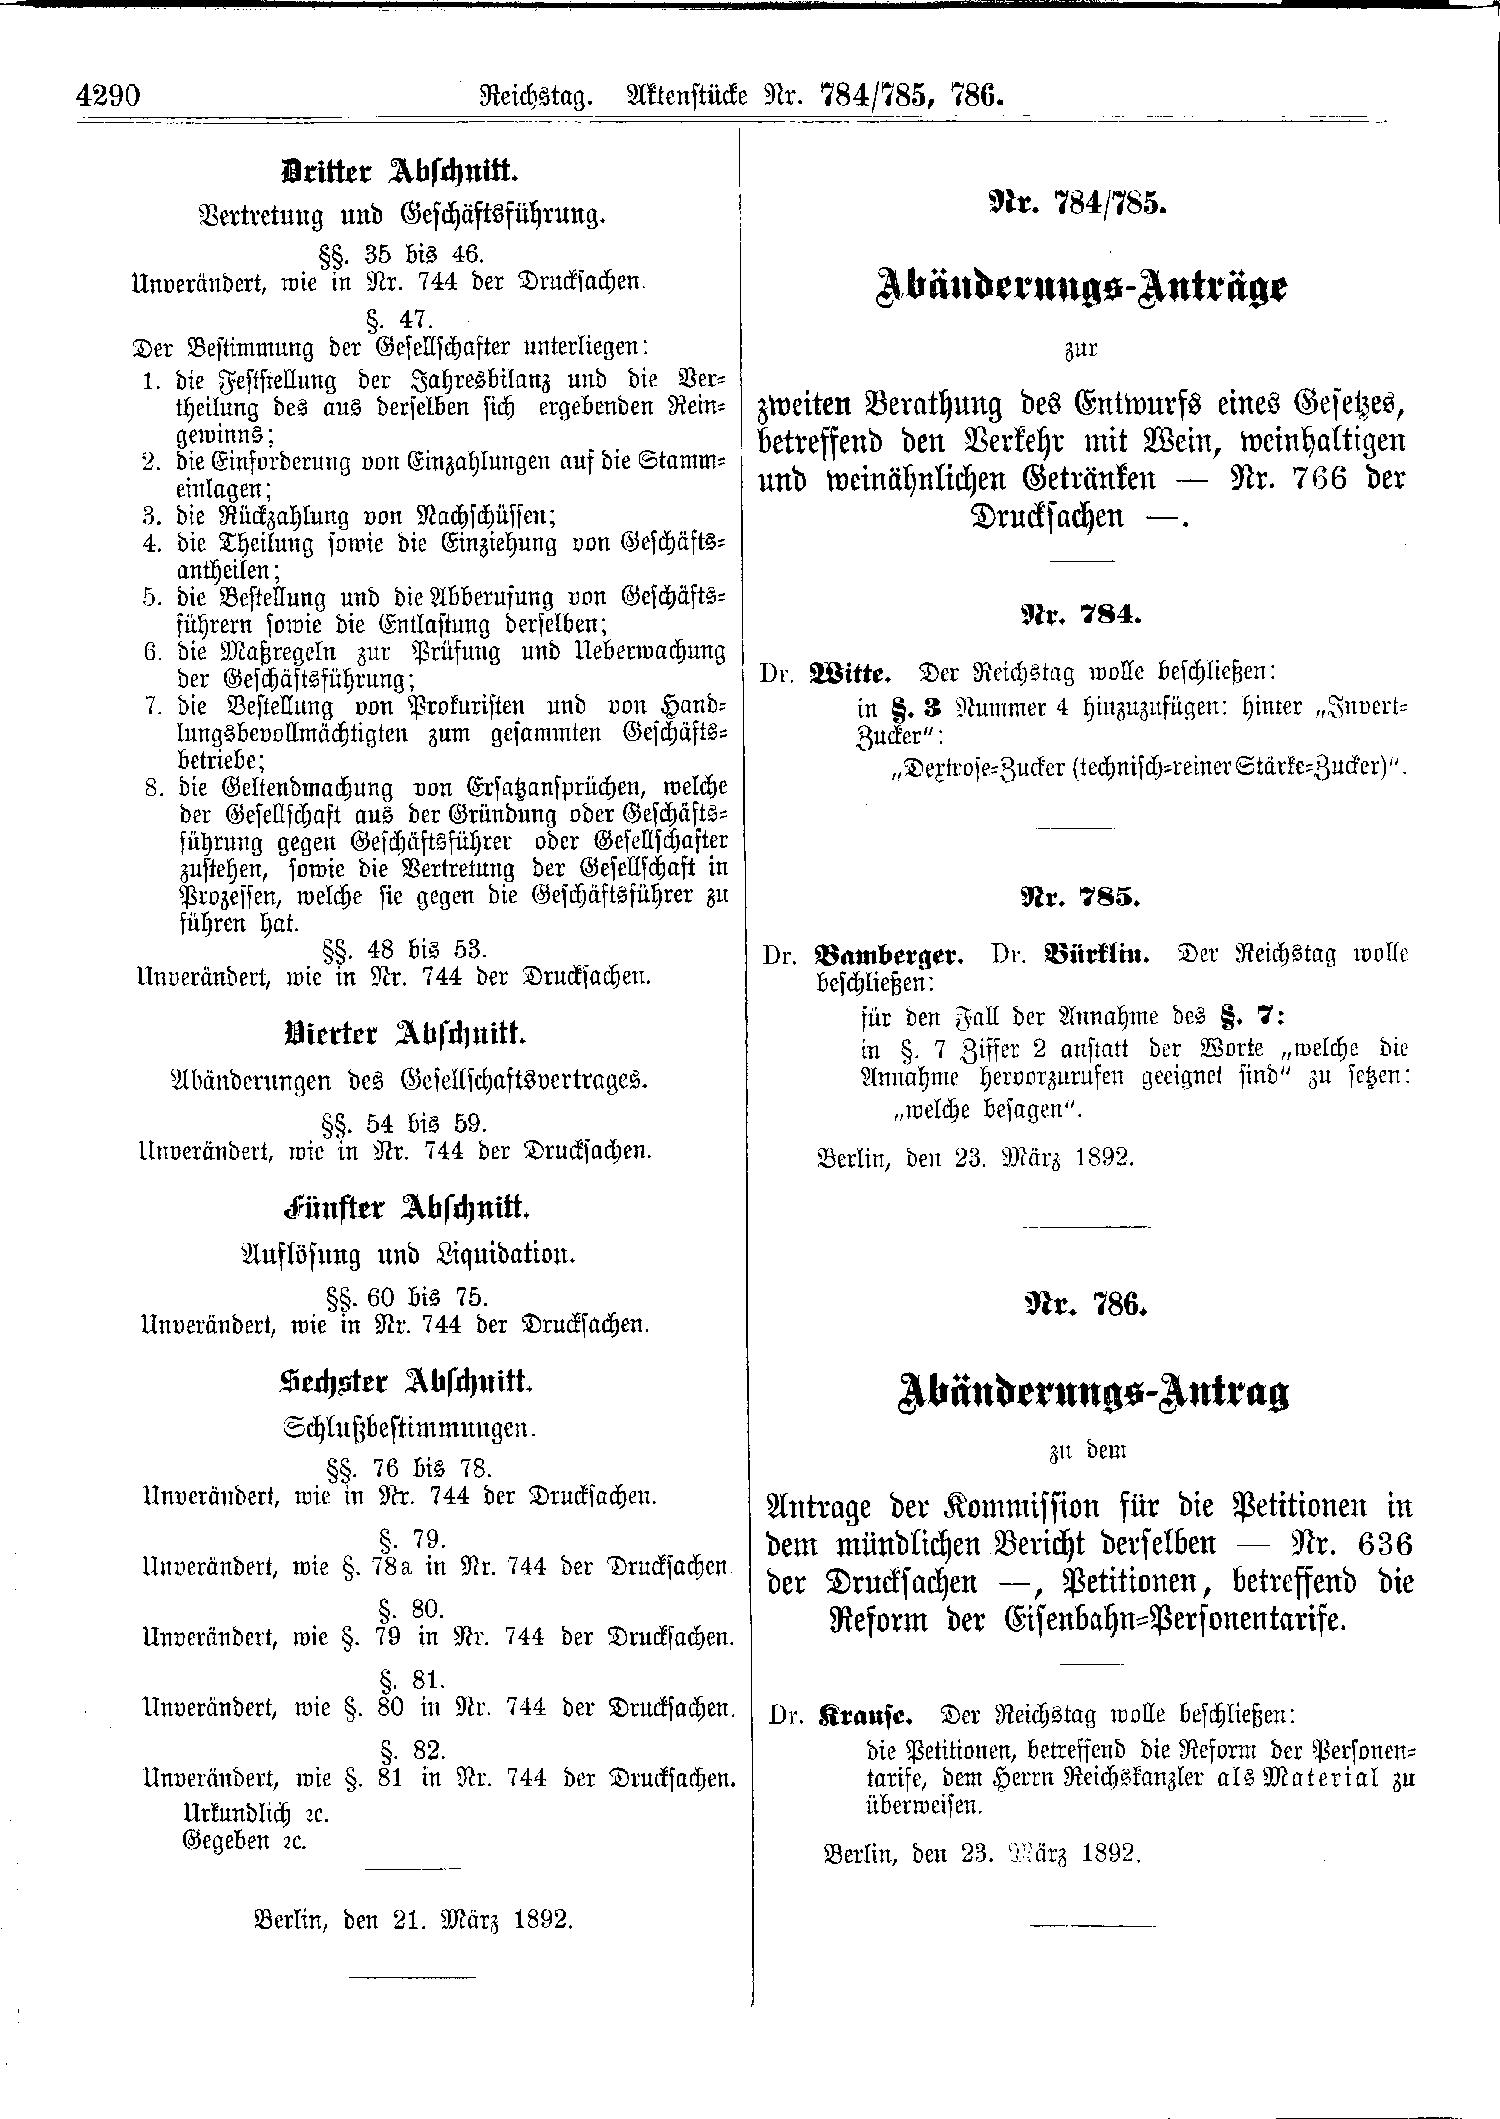 Scan of page 4290